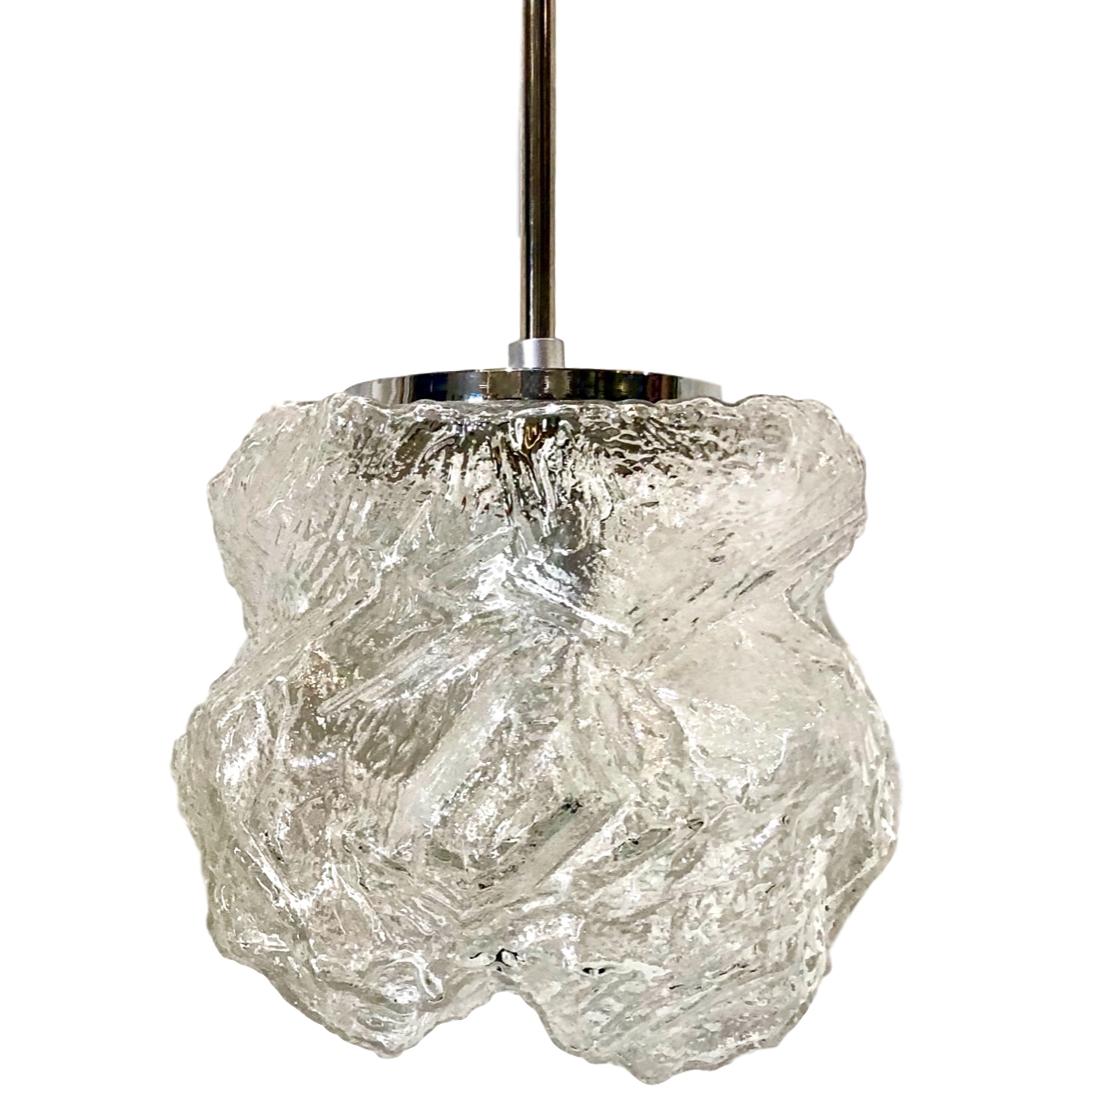 A pair of circa 1960's Italian ice glass globe pendant ceiling fixtures. Sold individually.

Measurements:
Current drop: 19.5